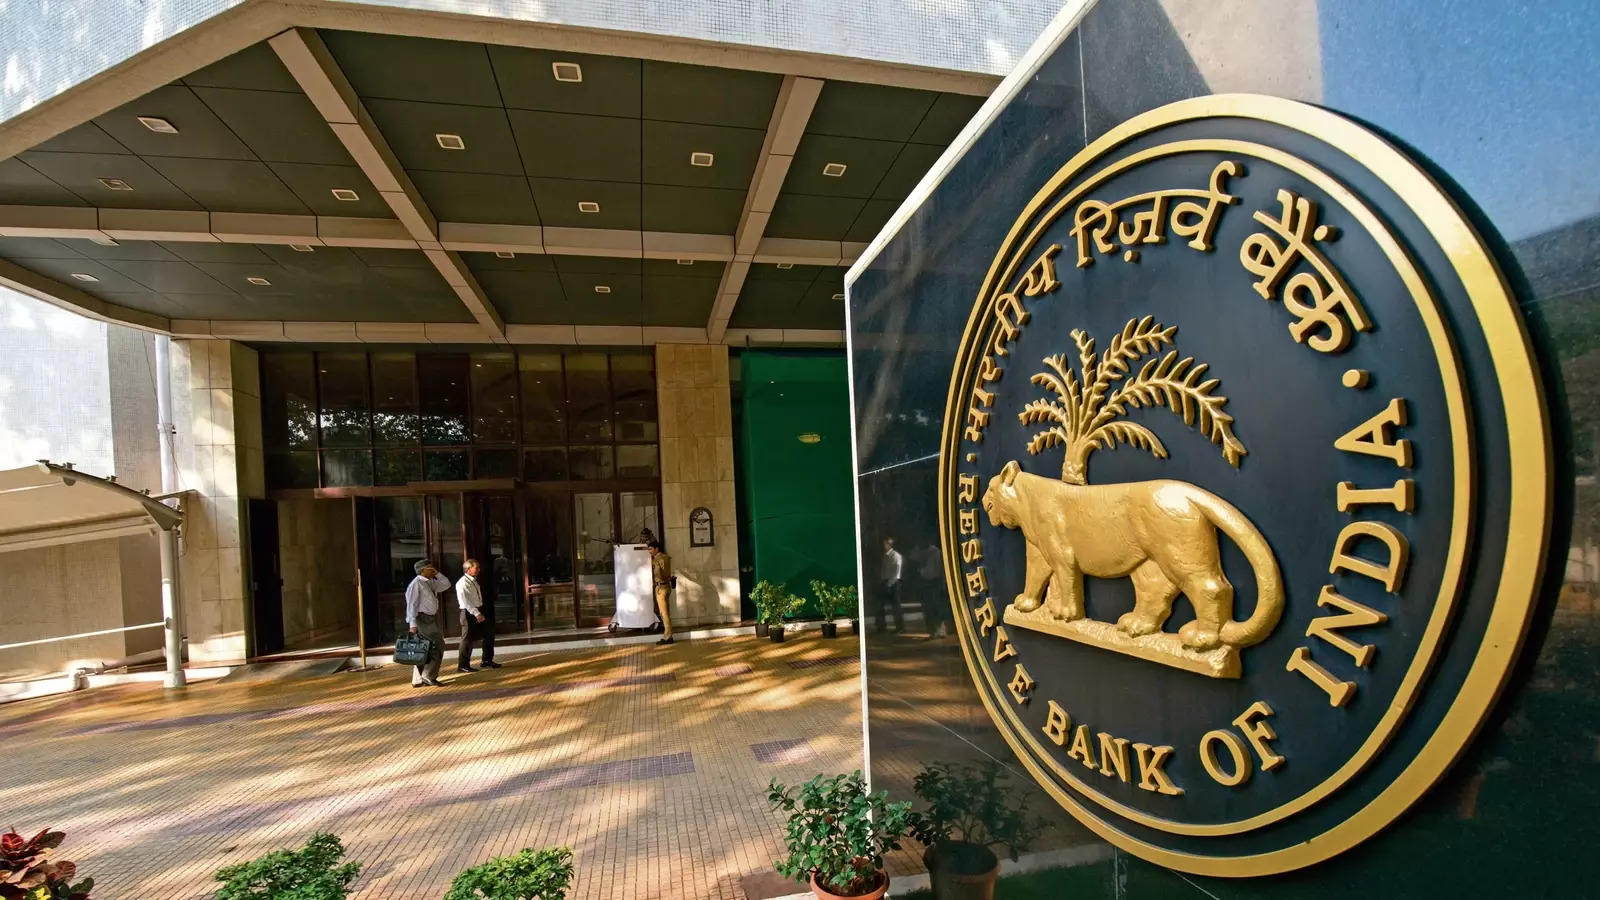  Earlier this month, the Reserve Bank of India (RBI) cancelled two auctions, due on February 11 and February 18, respectively, for up to Rs 48,000 crore of bonds, citing the government’s (favourable) cash balance.